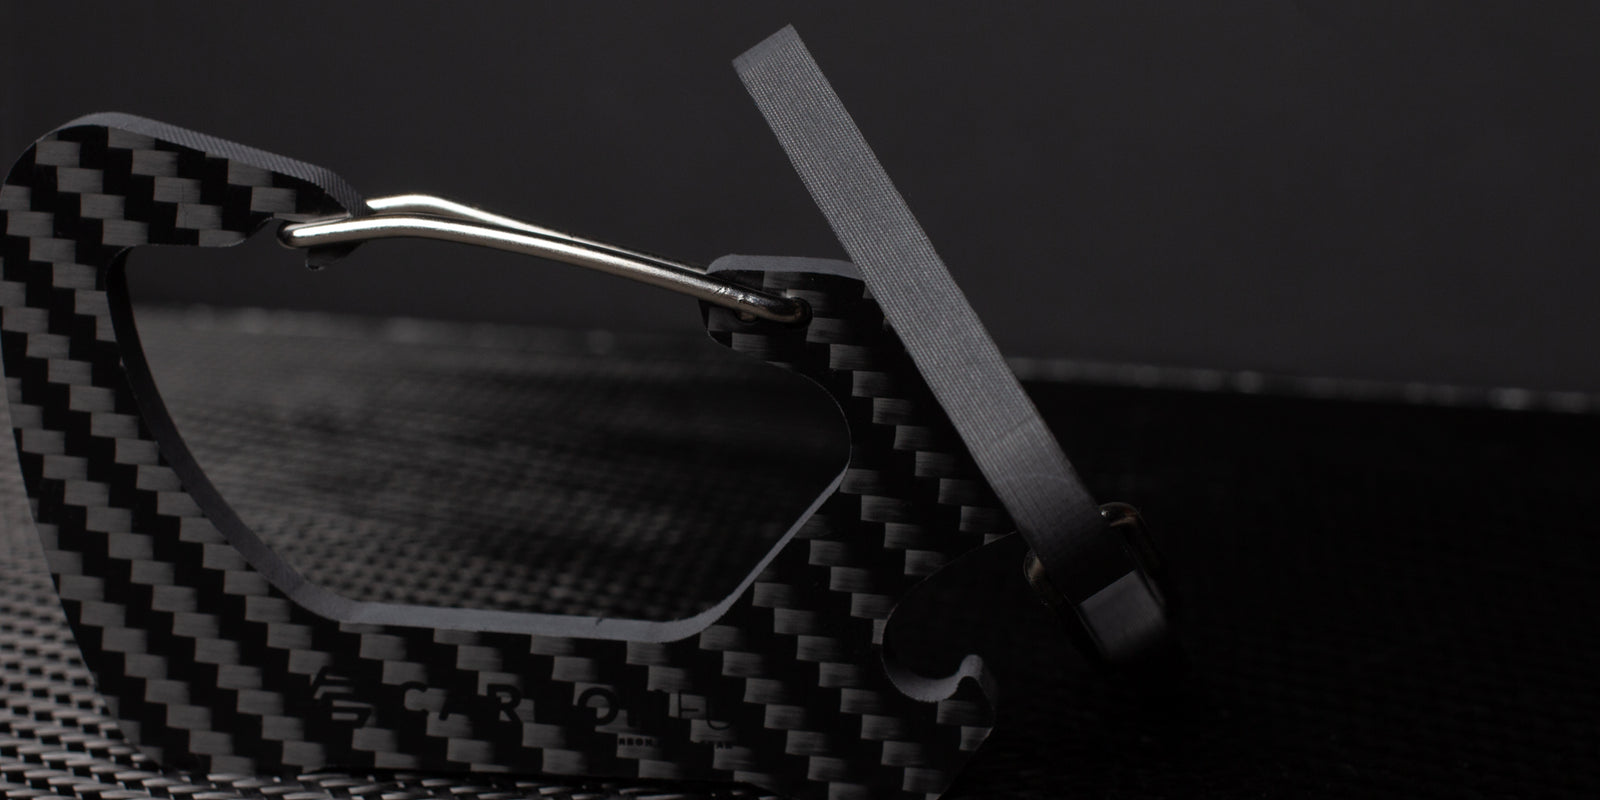 Side view of the CarbonFG Carabiner Bottle Opener showing its 6mm thickness and the durable twill weave carbon fiber pattern.